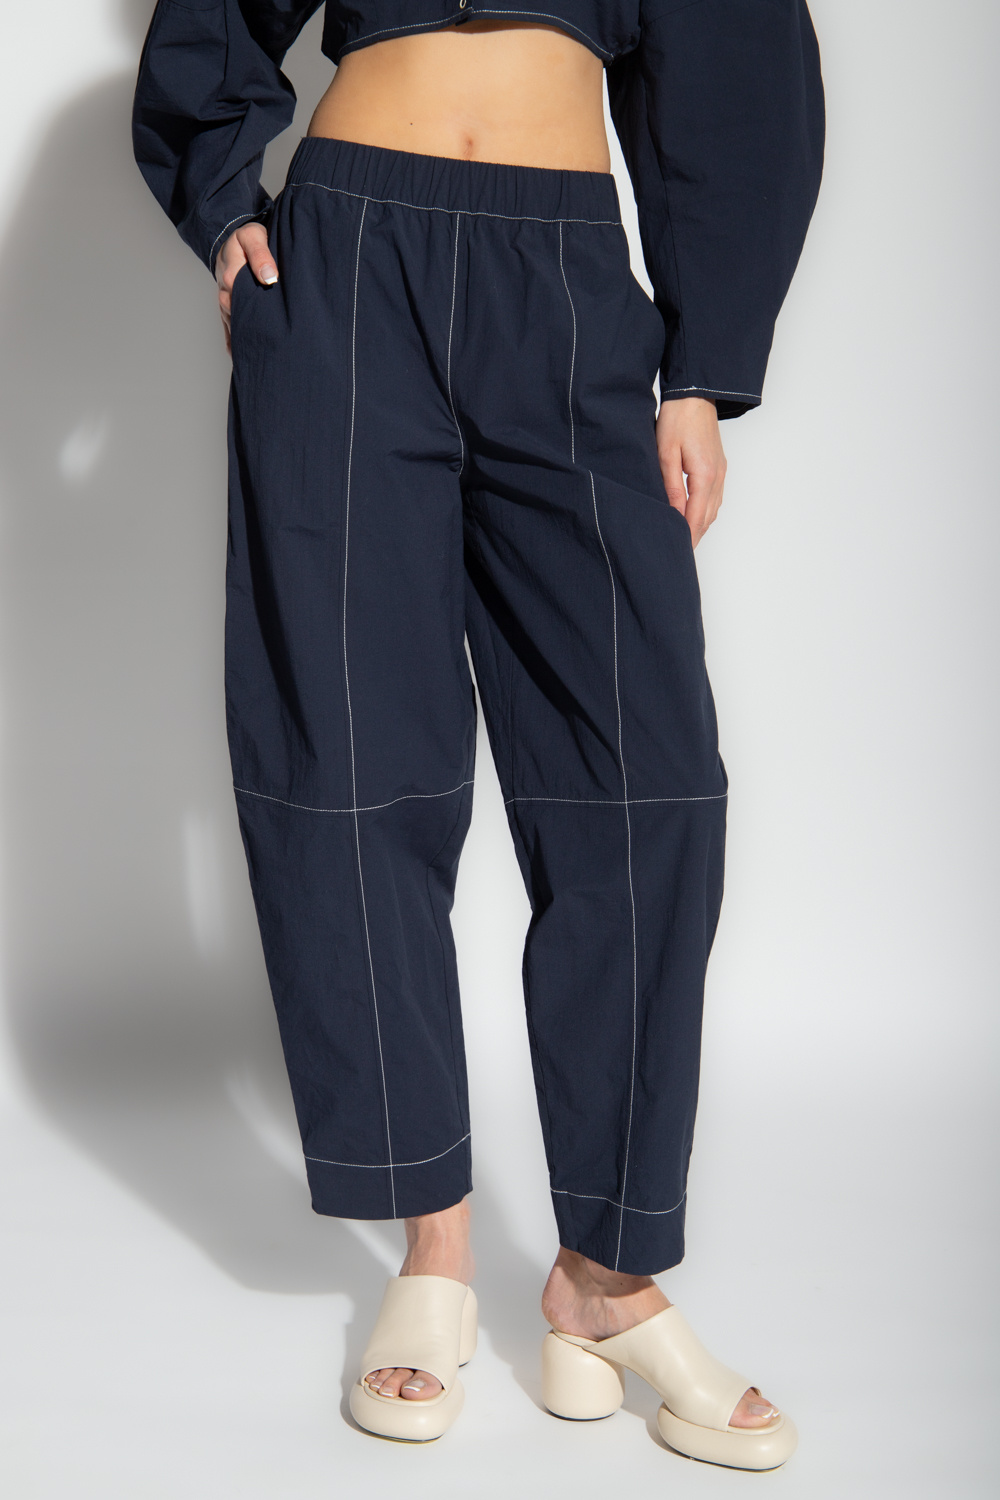 Ganni Vends trousers with contrasting seams